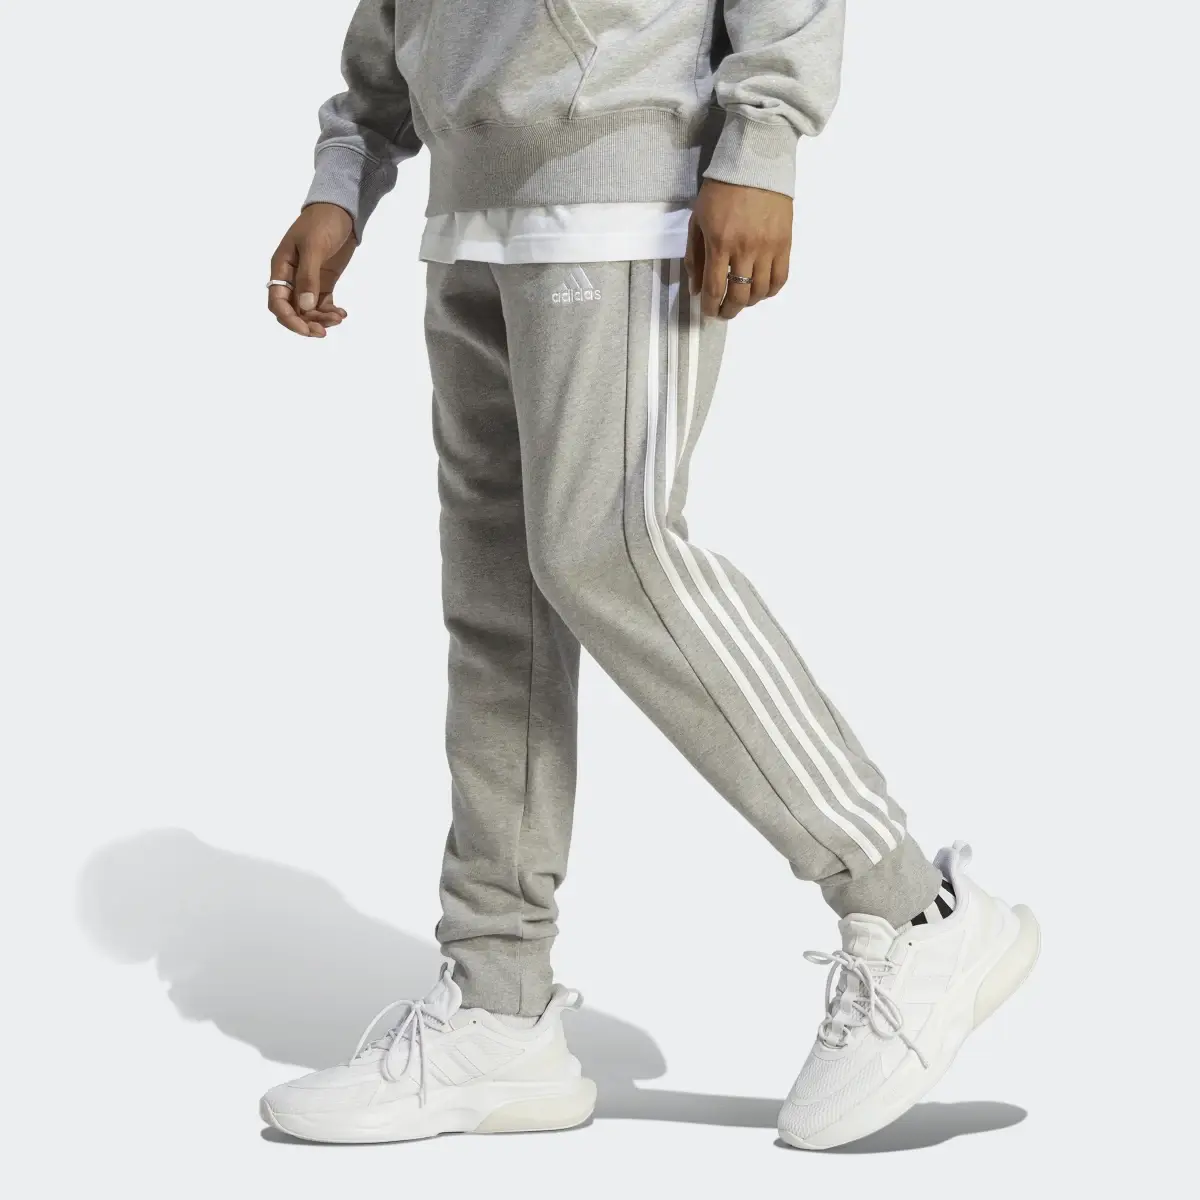 Adidas Essentials French Terry Tapered Cuff 3-Stripes Pants. 1